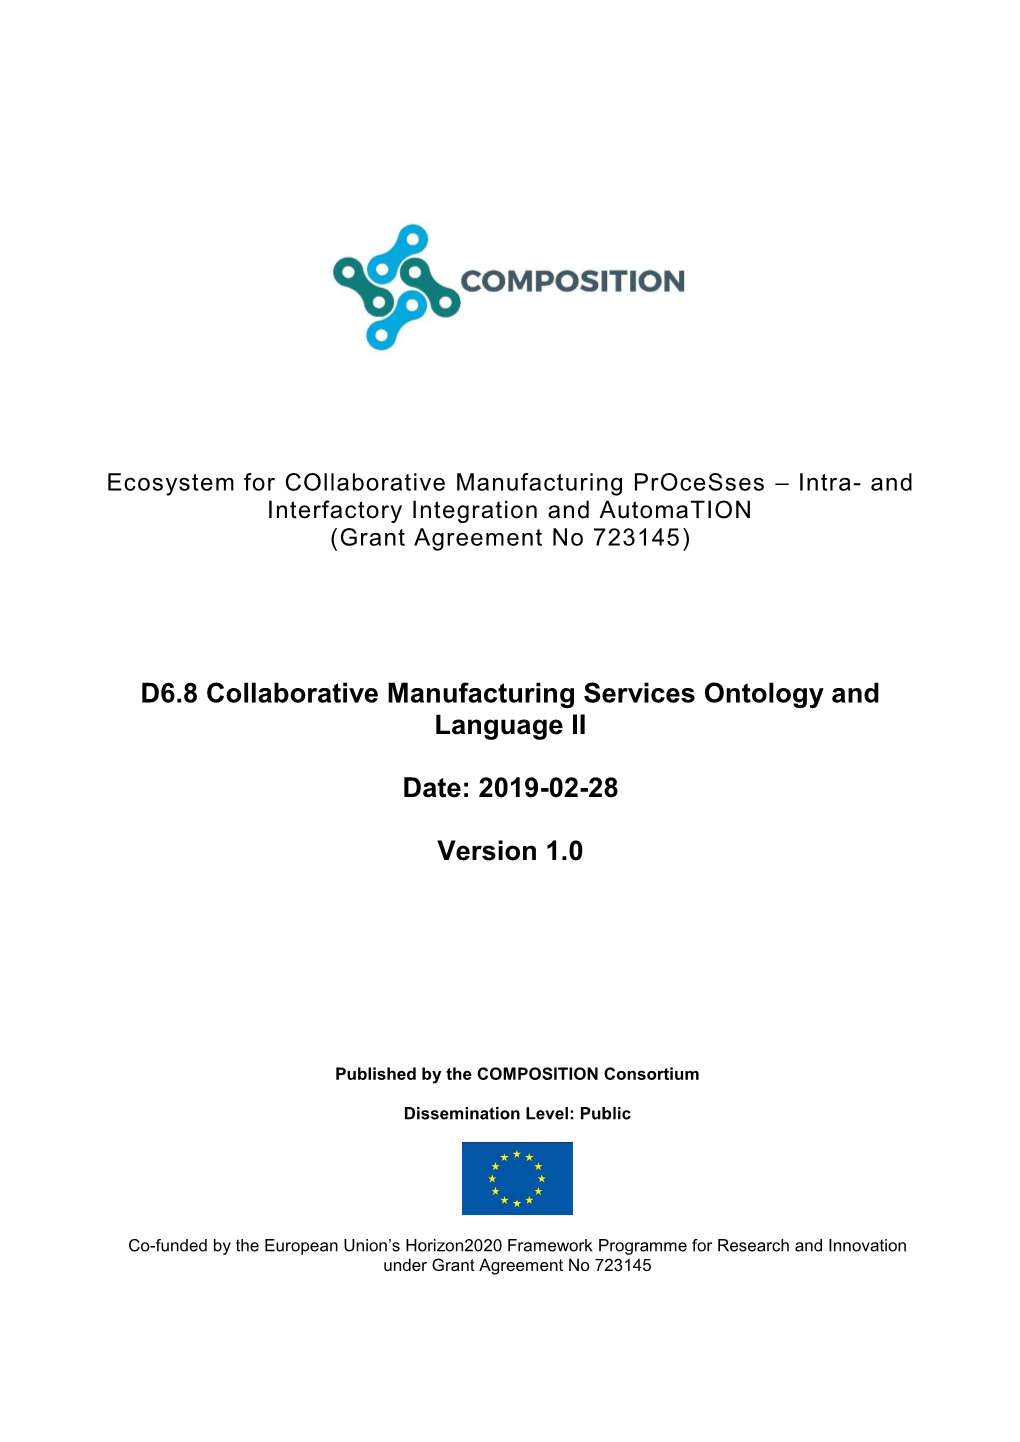 D6.8 Collaborative Manufacturing Services Ontology and Language II